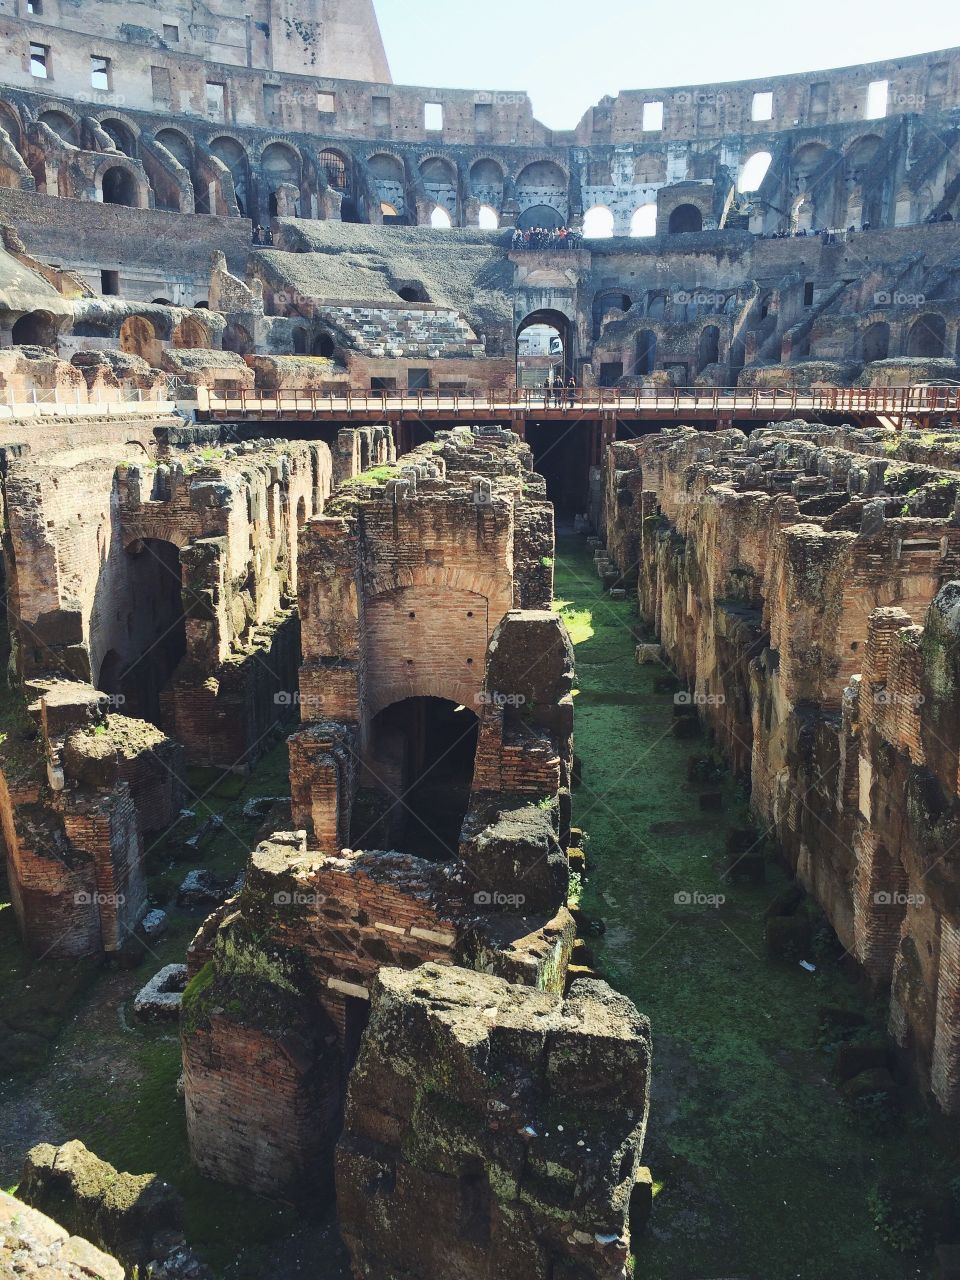 Tunnels of the colosseum; Rome, Italy.